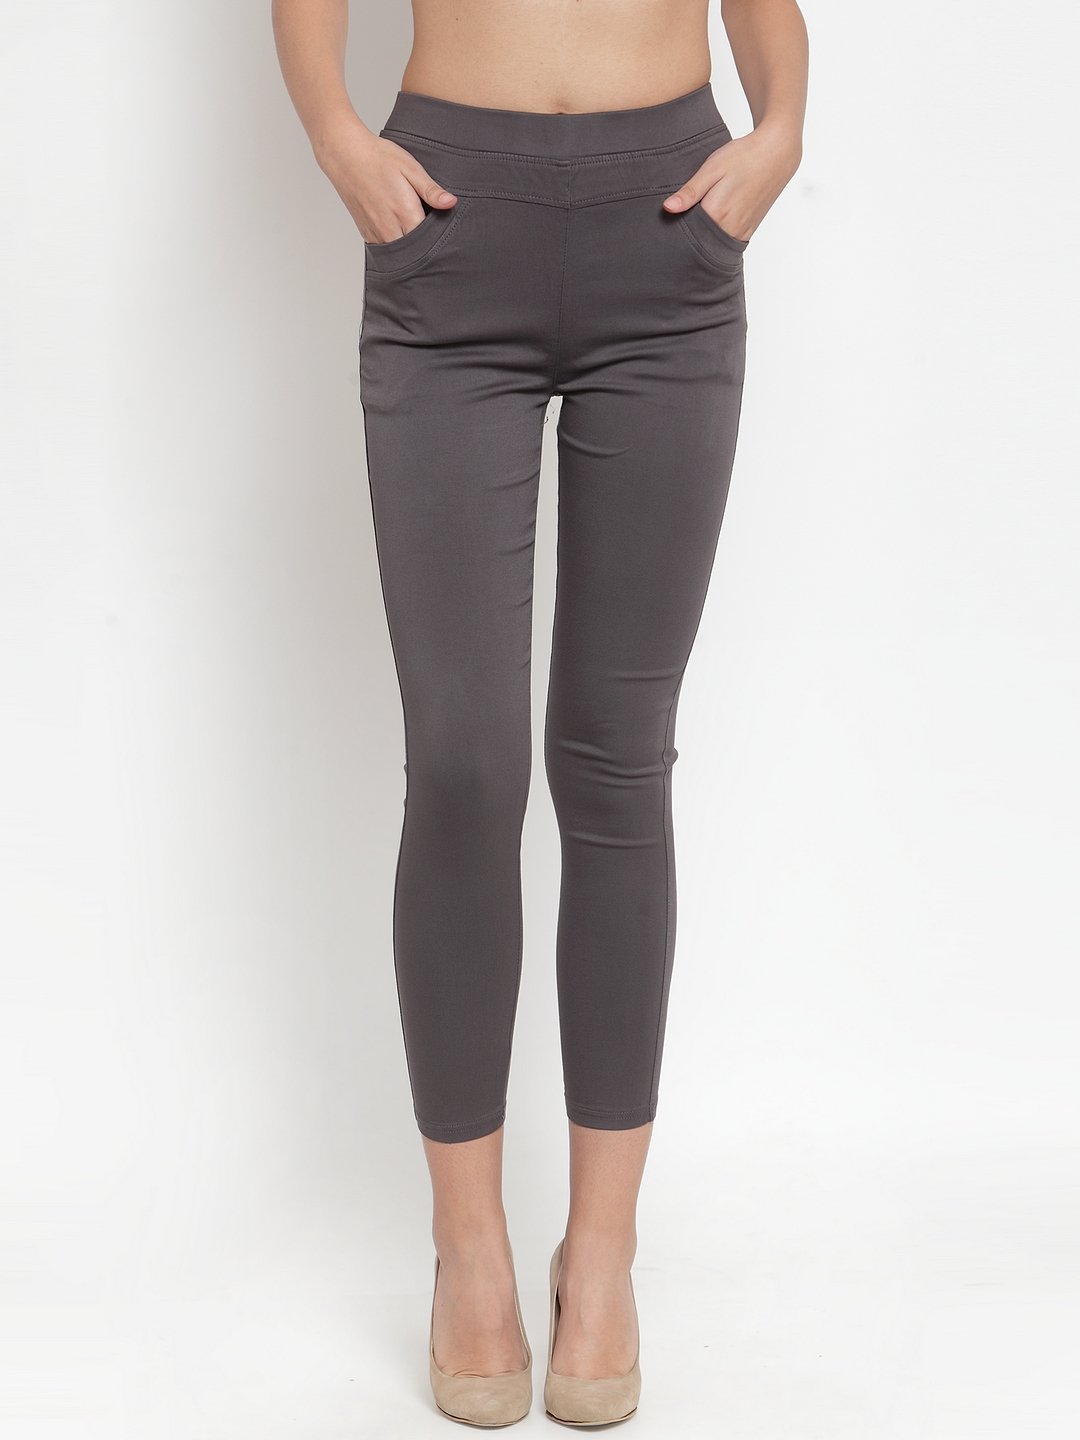 https://1099554485.rsc.cdn77.org/upload/products/dark_grey_cotton_solid_jeggings_1611213026as1992717_1.jpg